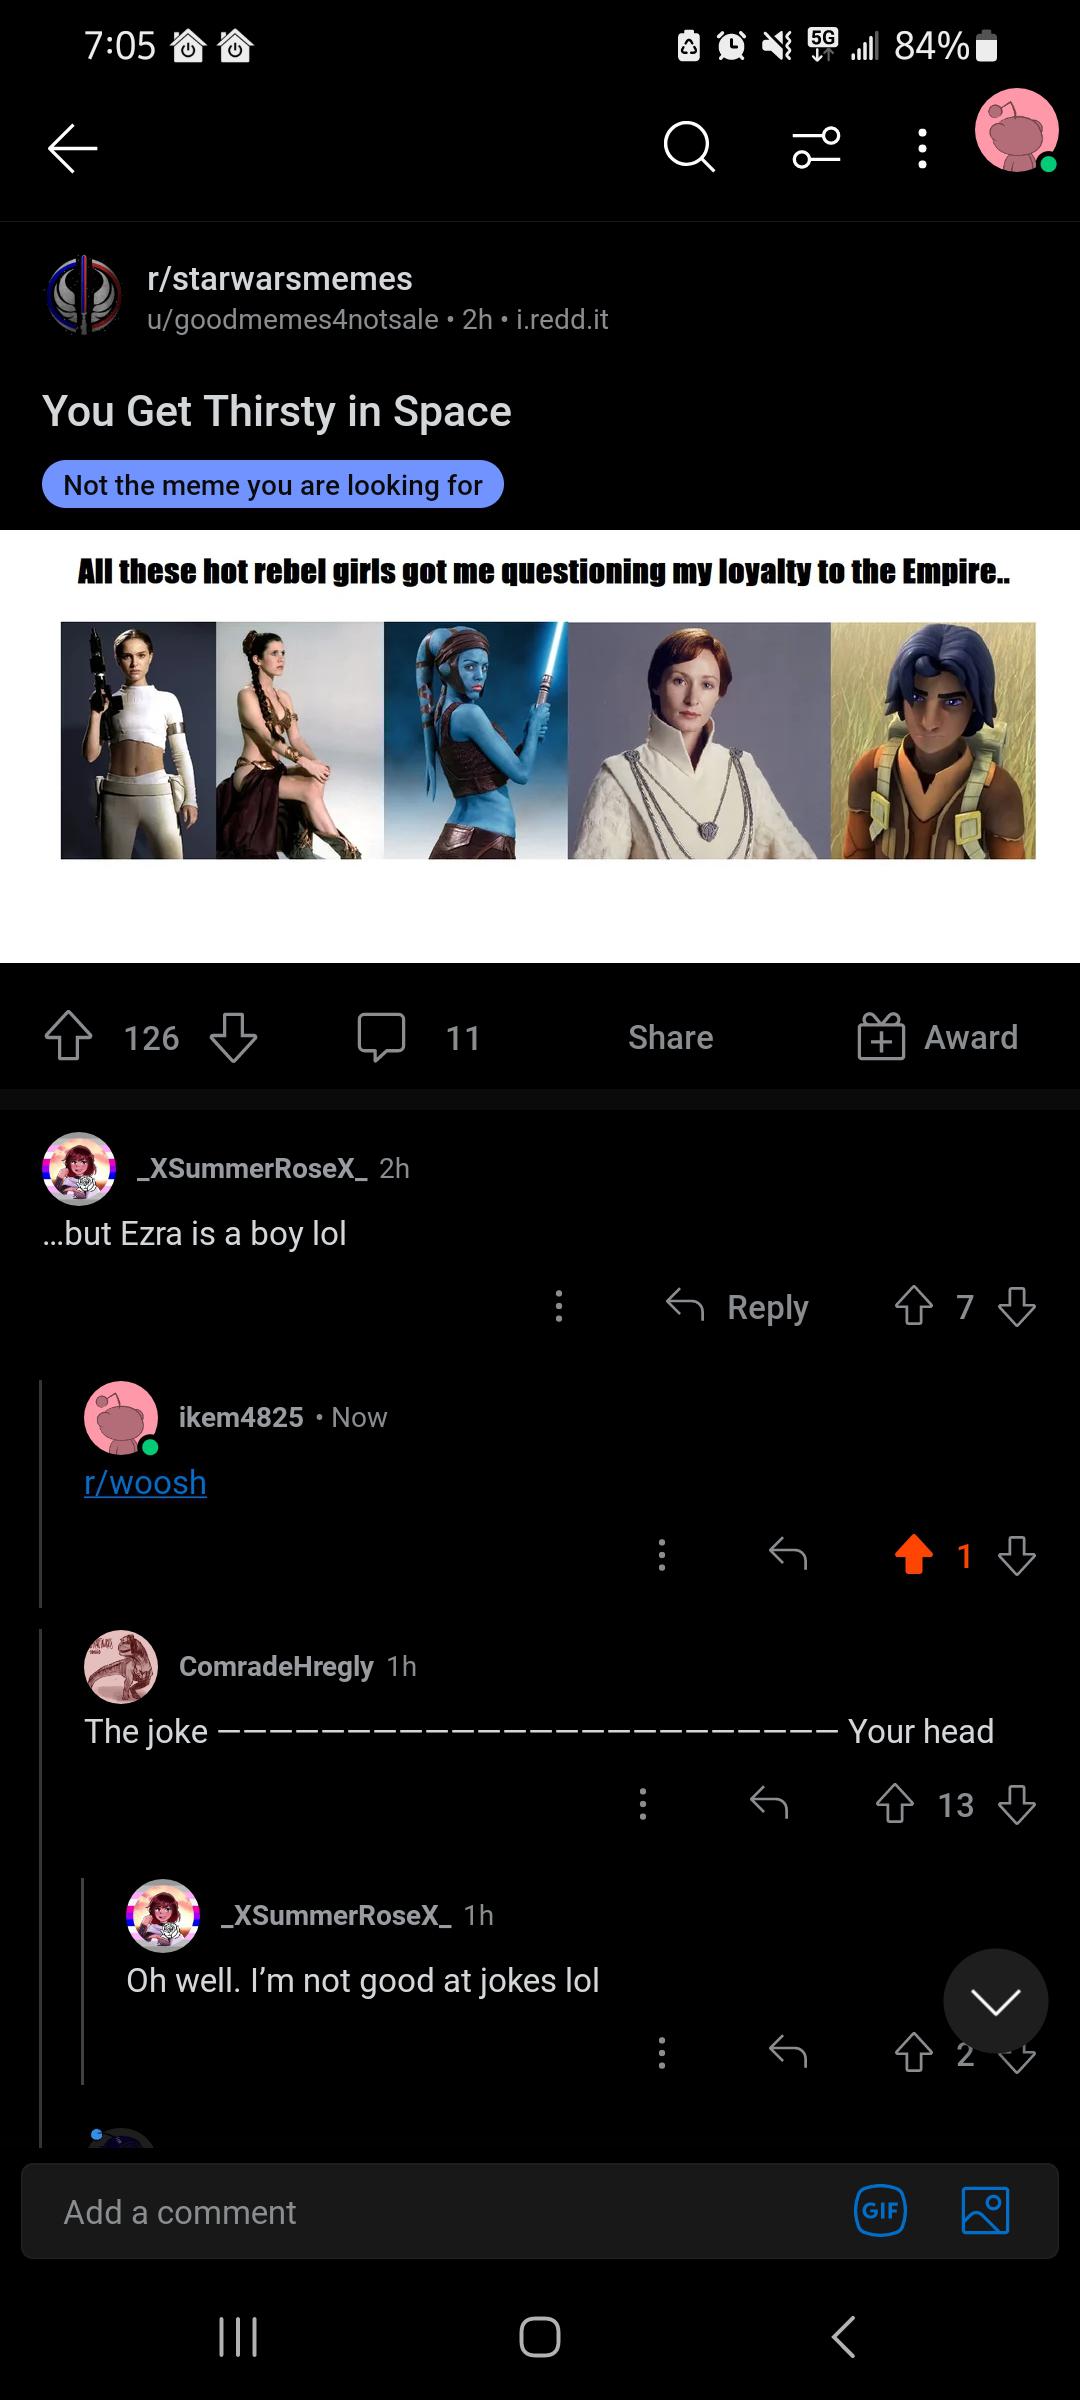 people who missed the joke - screenshot - rstarwarsmemes ugoodmemes4notsale 2h i.redd.it You Get Thirsty in Space Not the meme you are looking for " All these hot rebel girls got me questioning my loyalty to the Empire.. 126 Remo _XSummerRoseX_ 2h ...but 